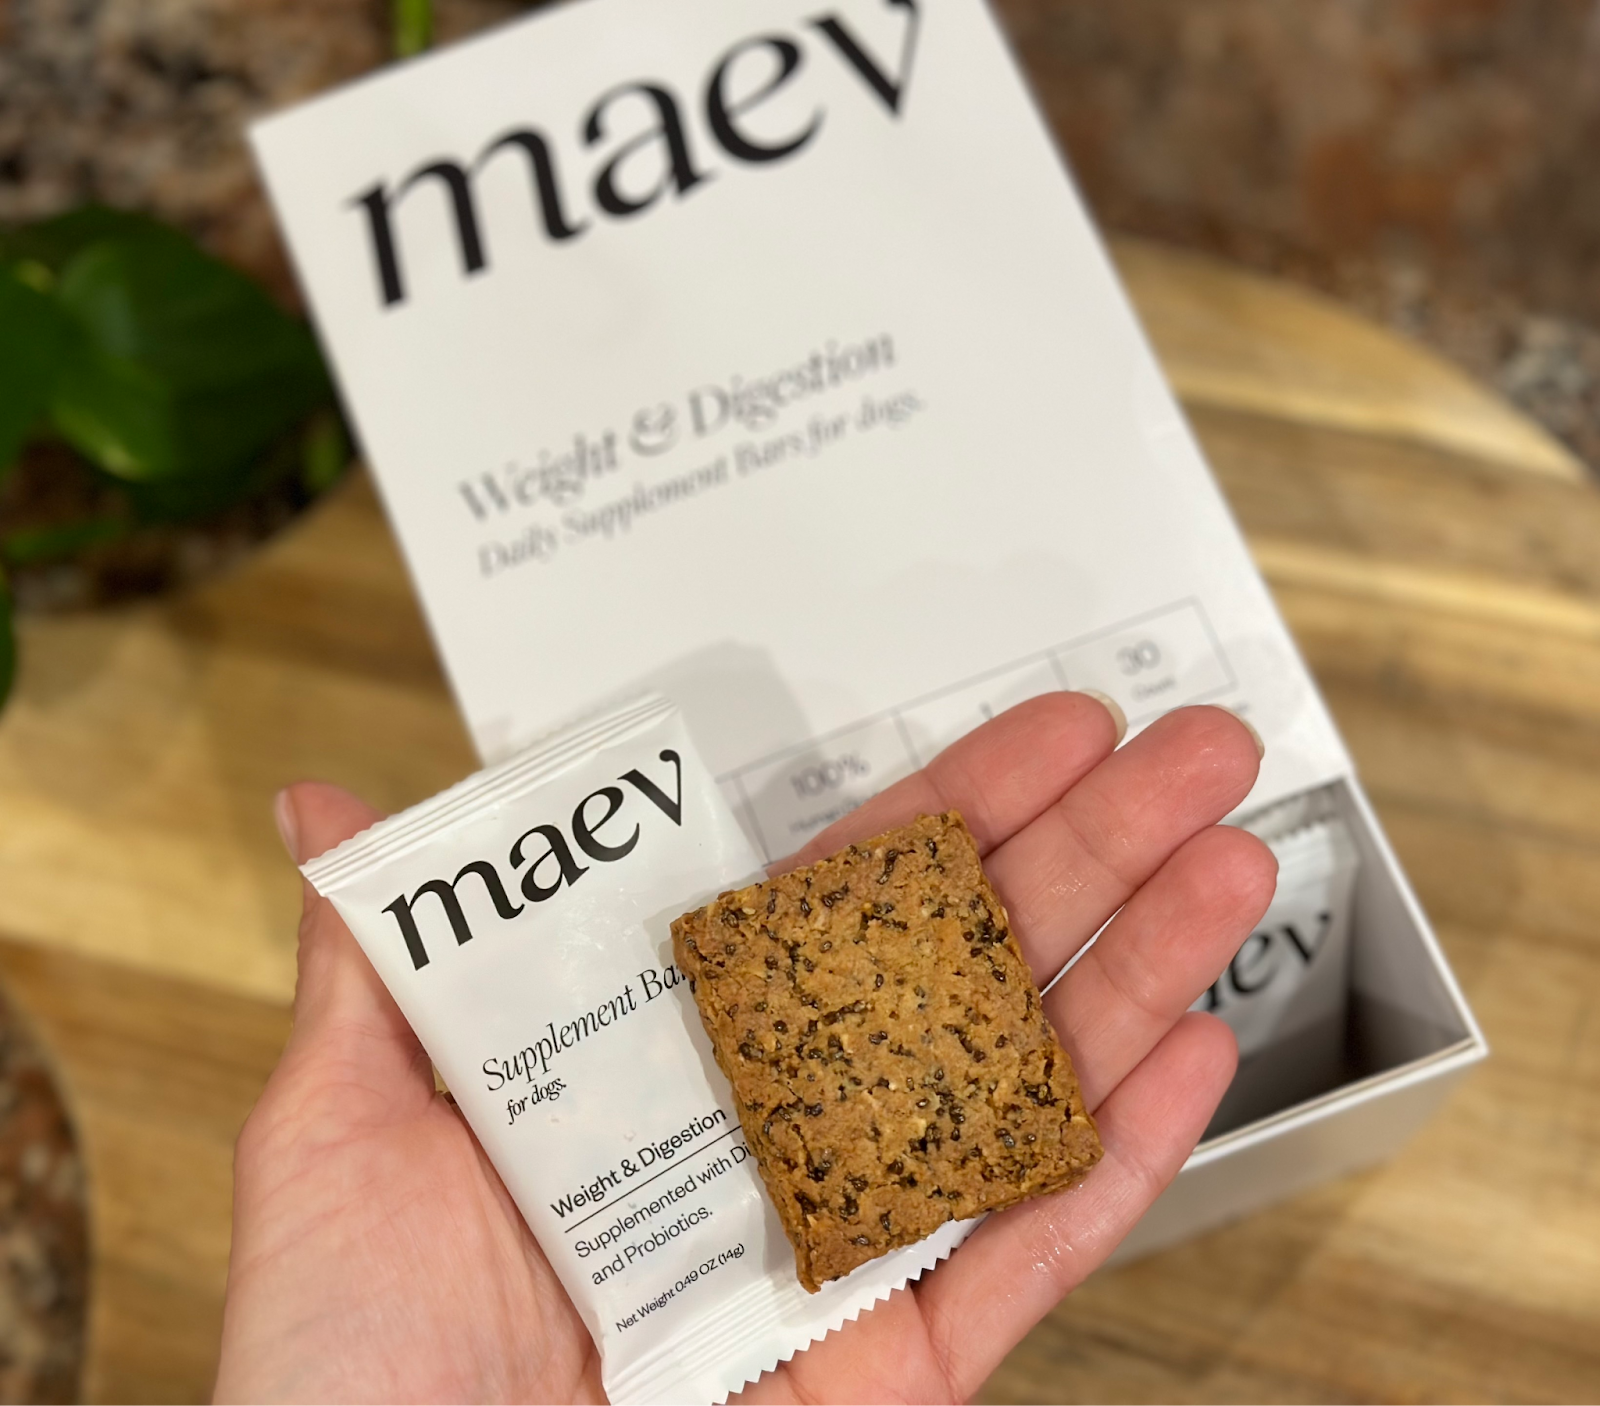 A picture of me holding a Maev supplement bar. They're small squares that resemble a granola bar.